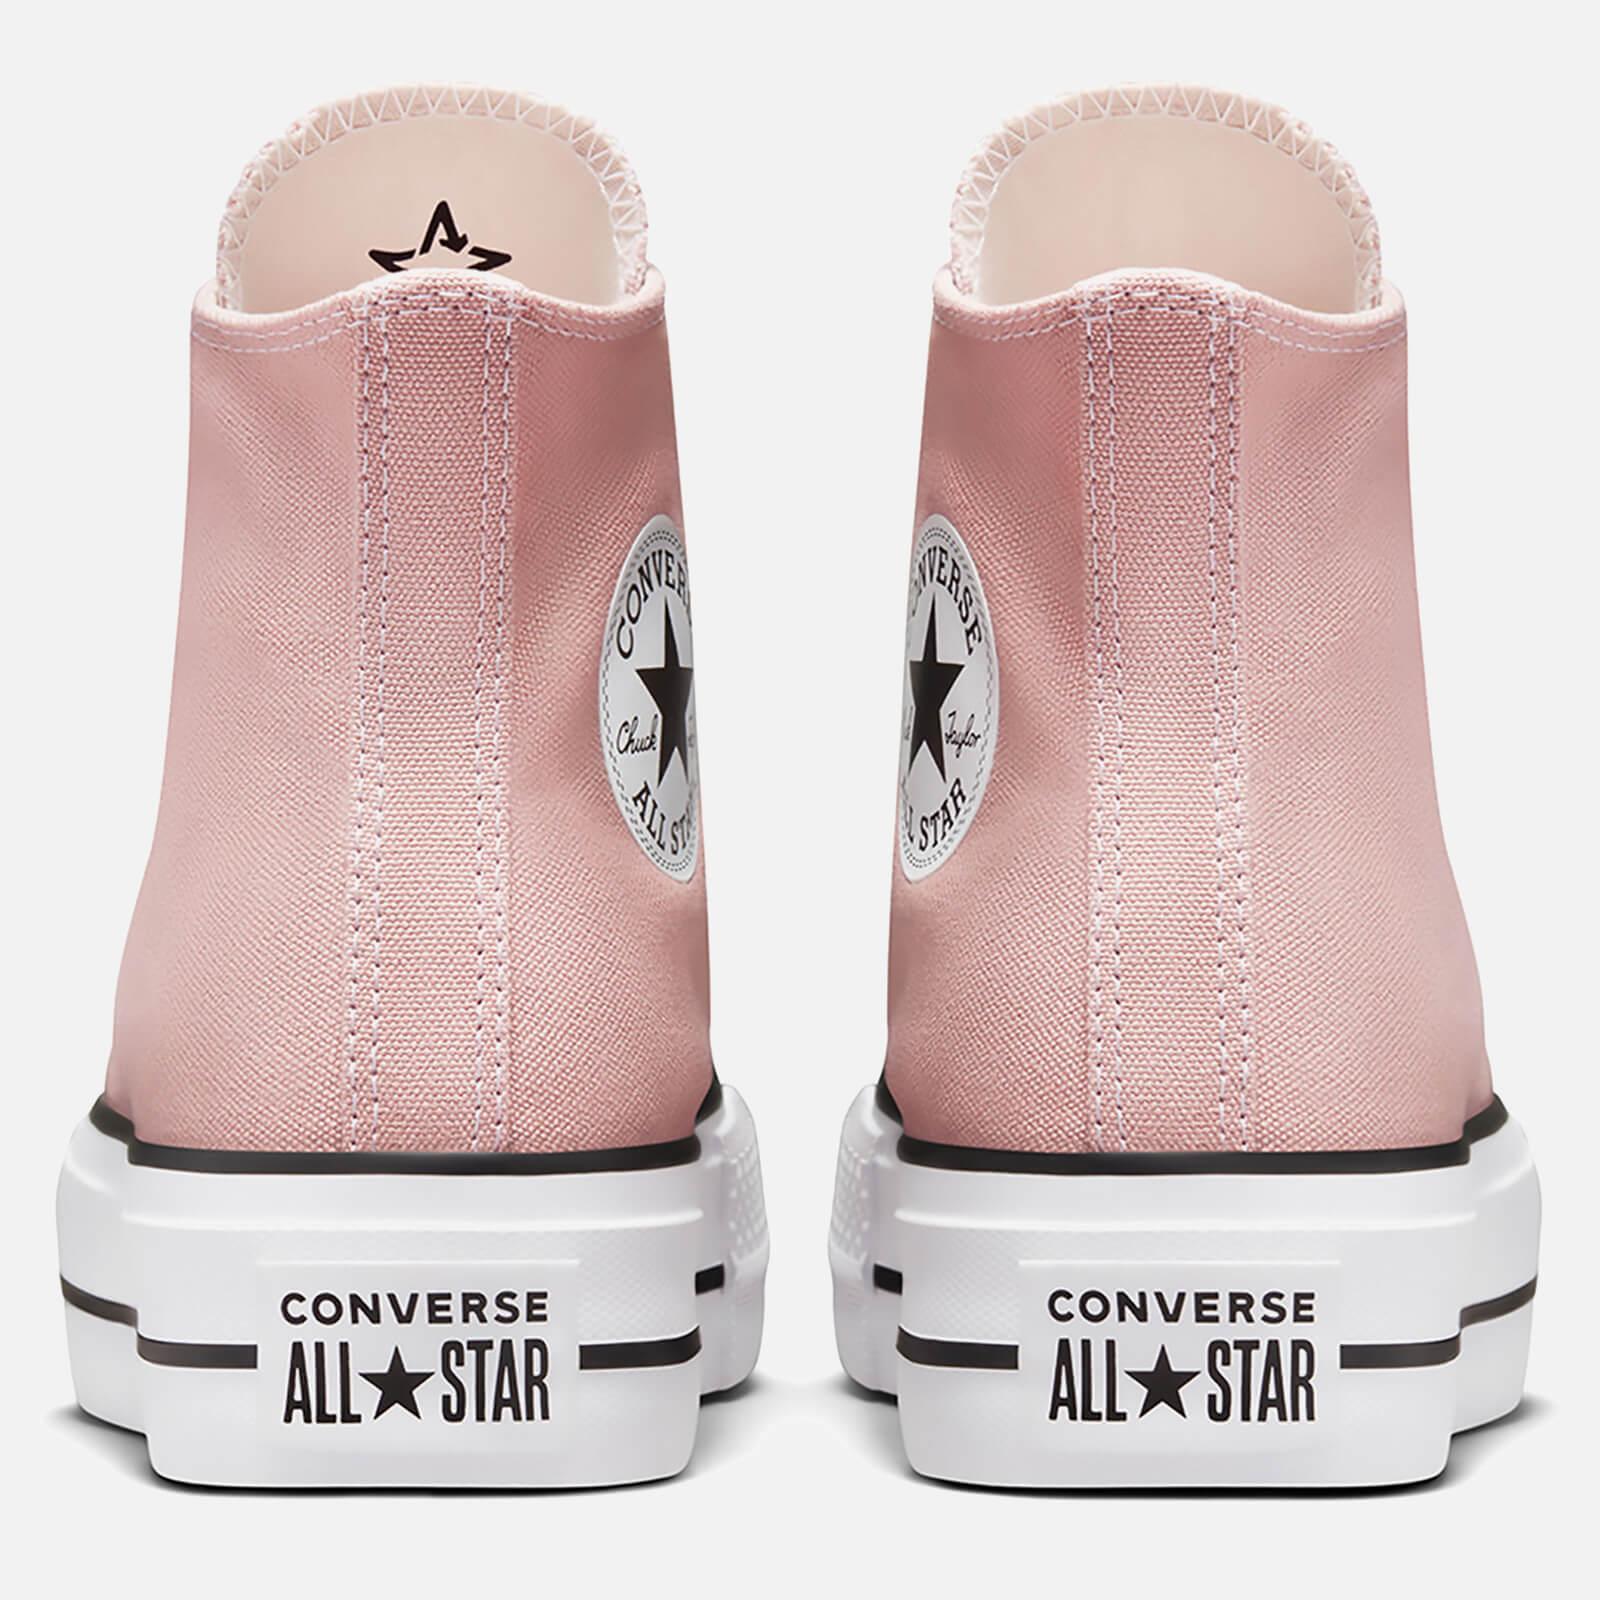 Converse Chuck Taylor All Star Lift Hi-top Trainers in Pink | Lyst